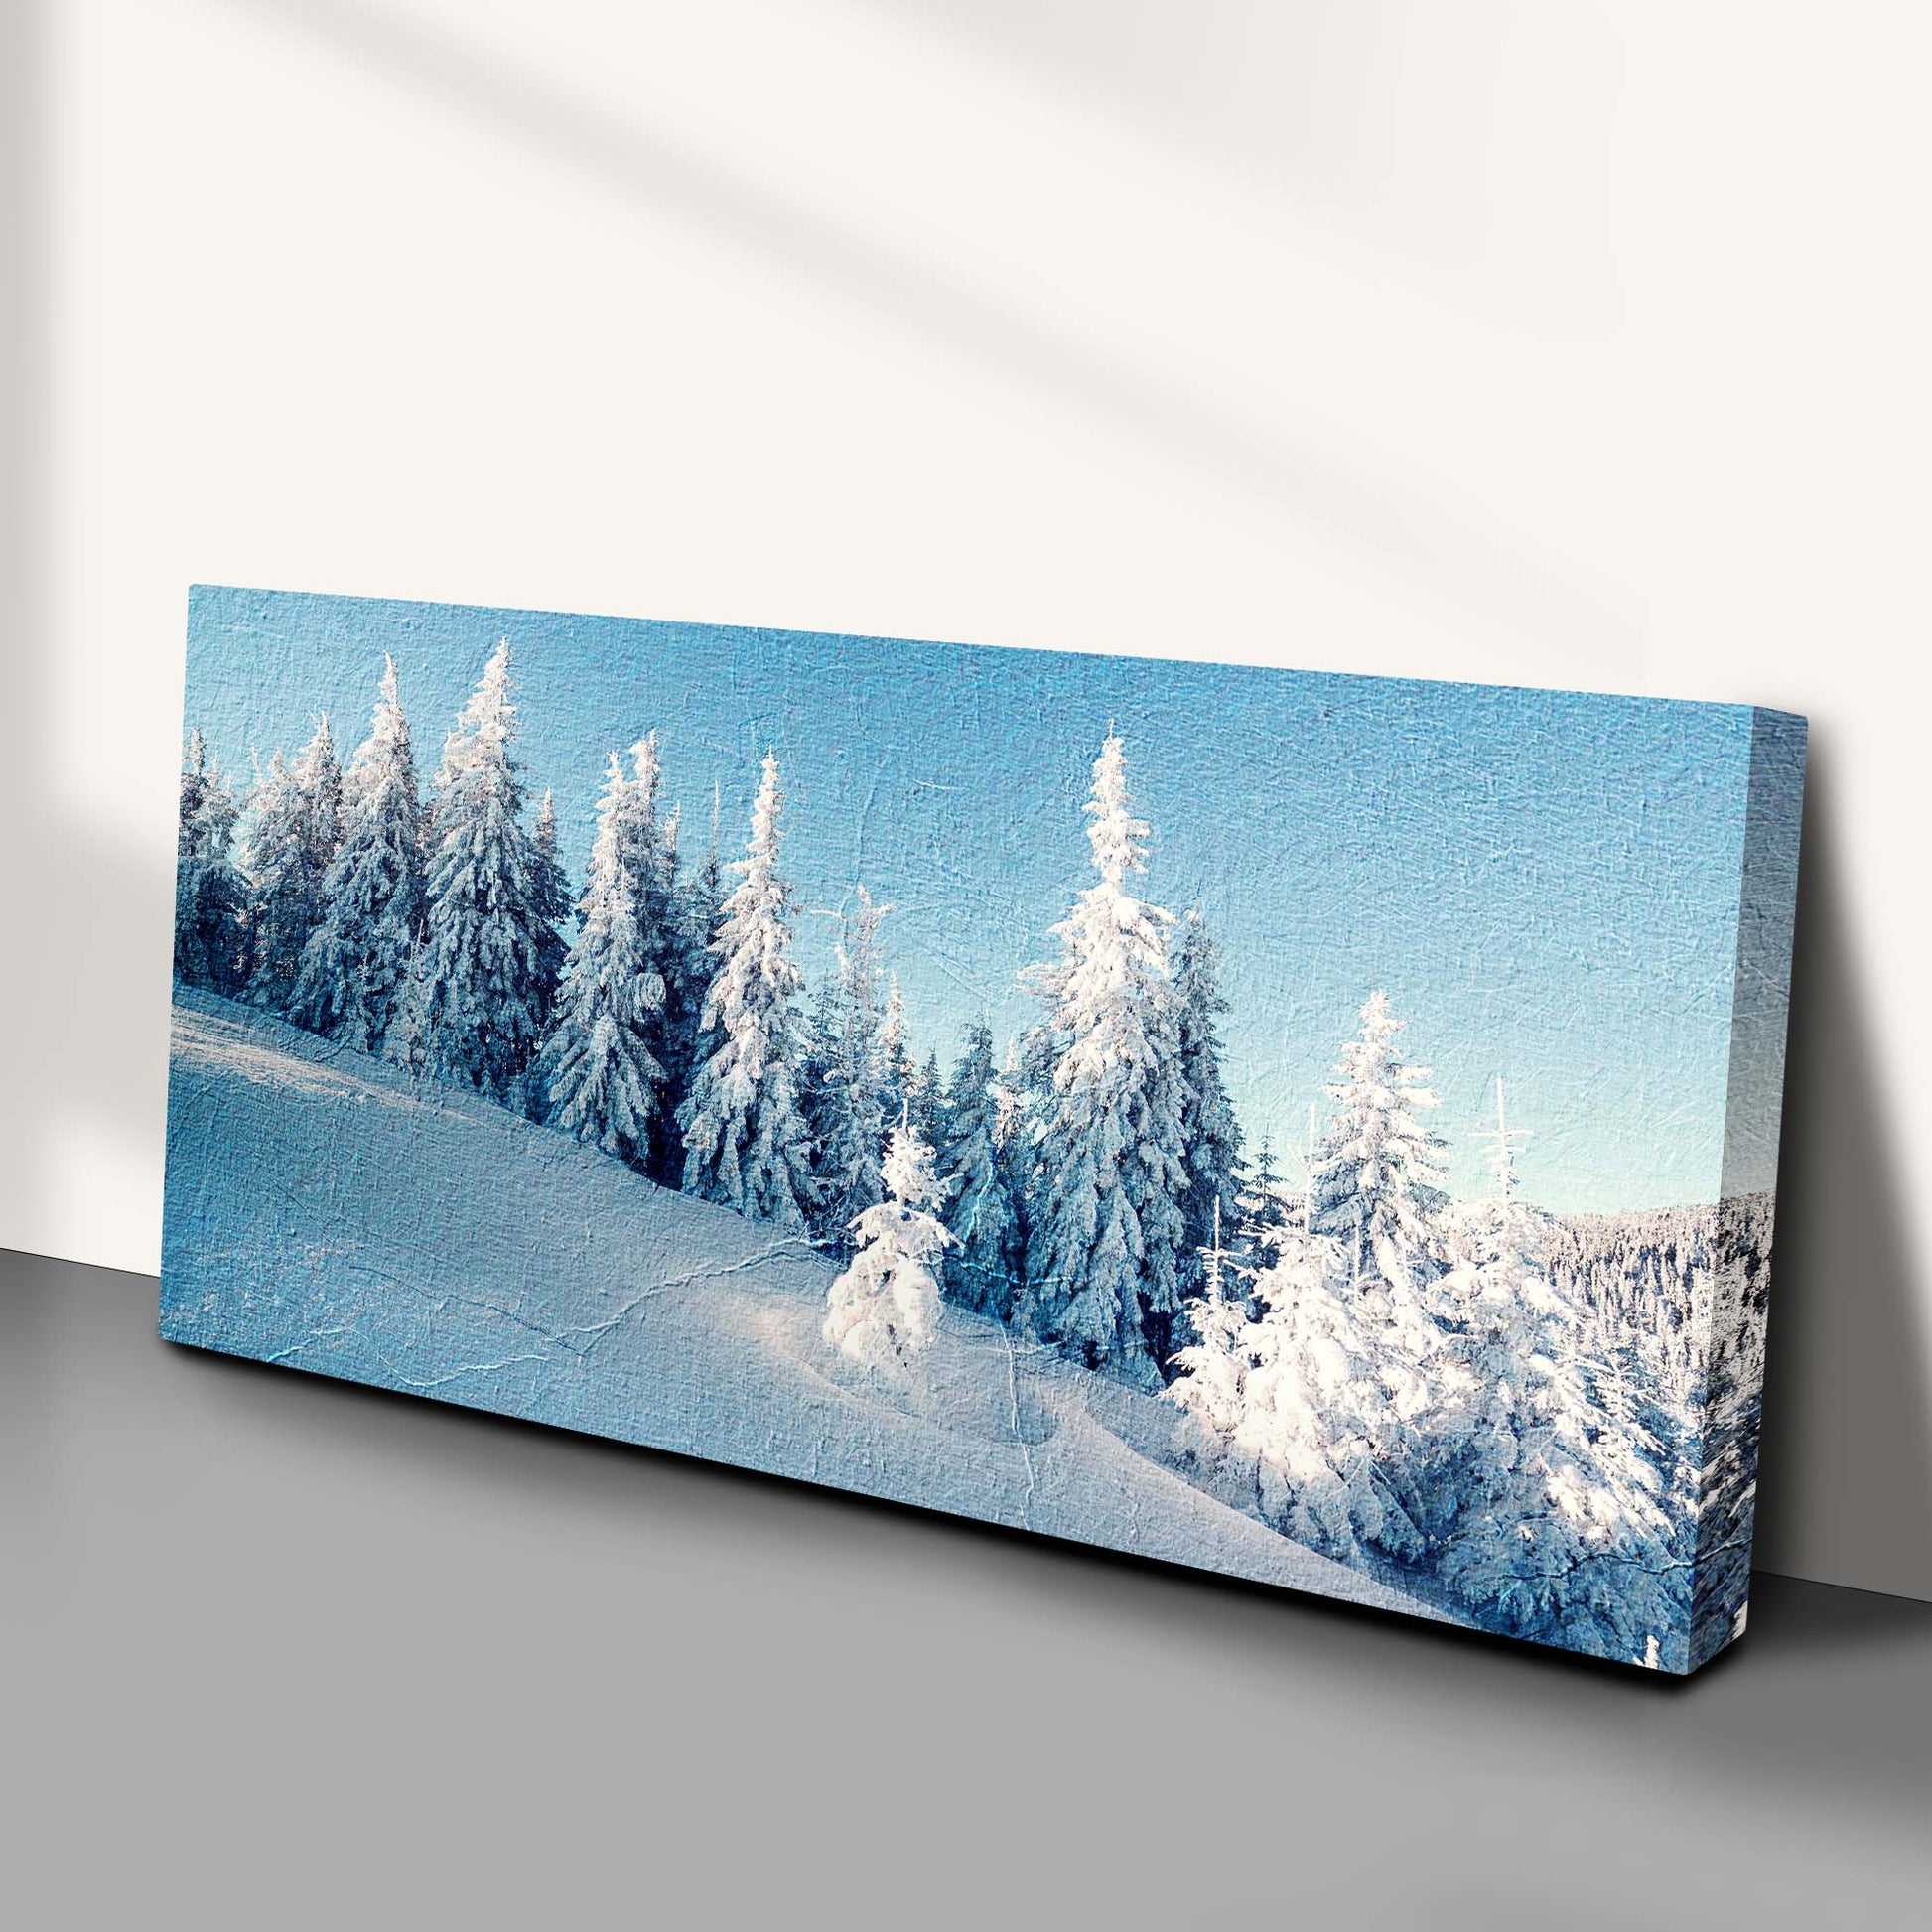 Snow Covered Pine Trees Canvas Wall Art Style 1 - Image by Tailored Canvases